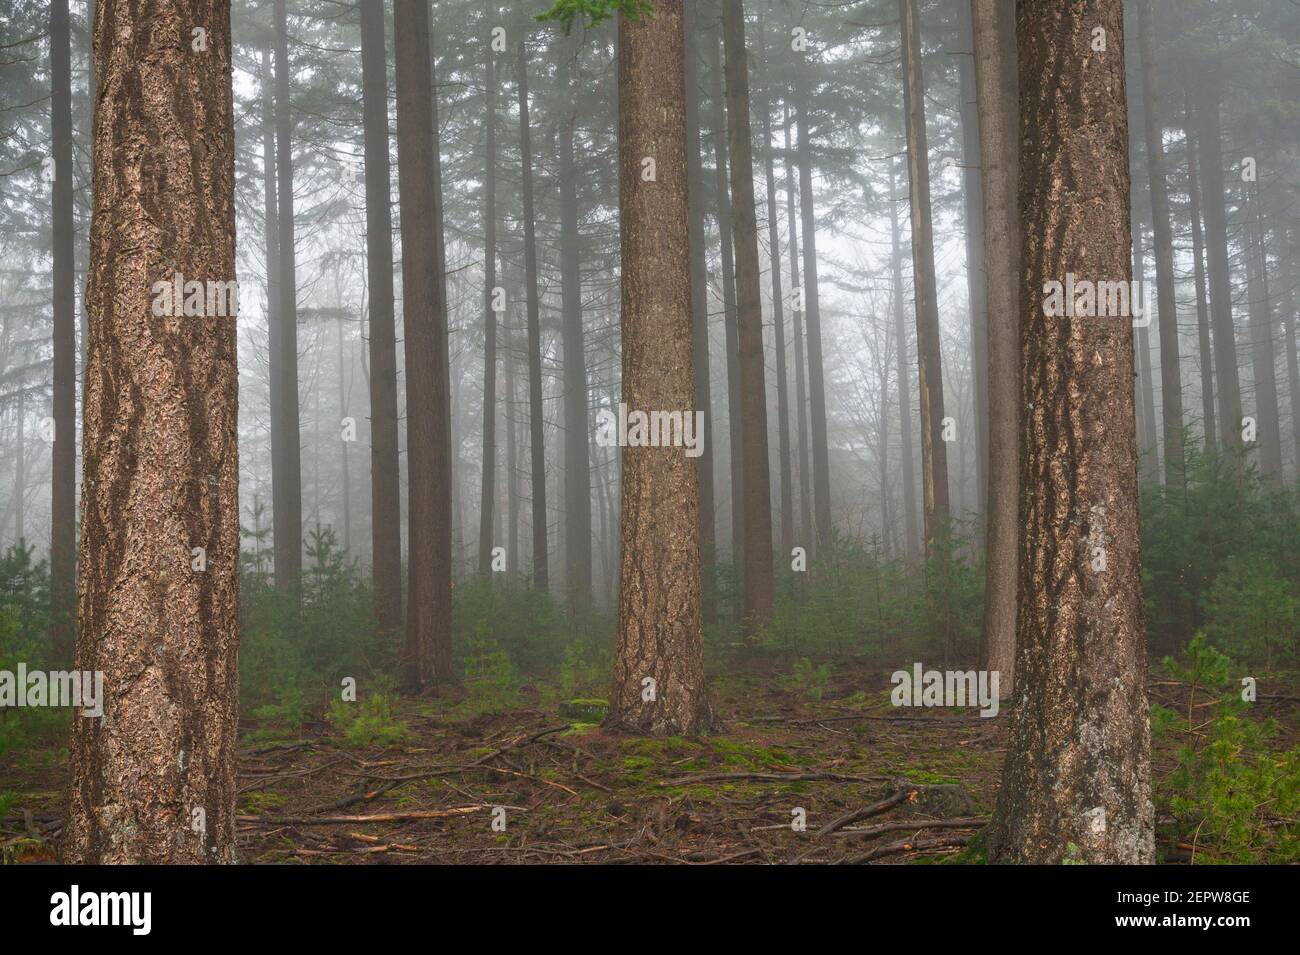 Vertical lines of tall pine trees in a misty forest, Veluwe, the Netherlands Stock Photo